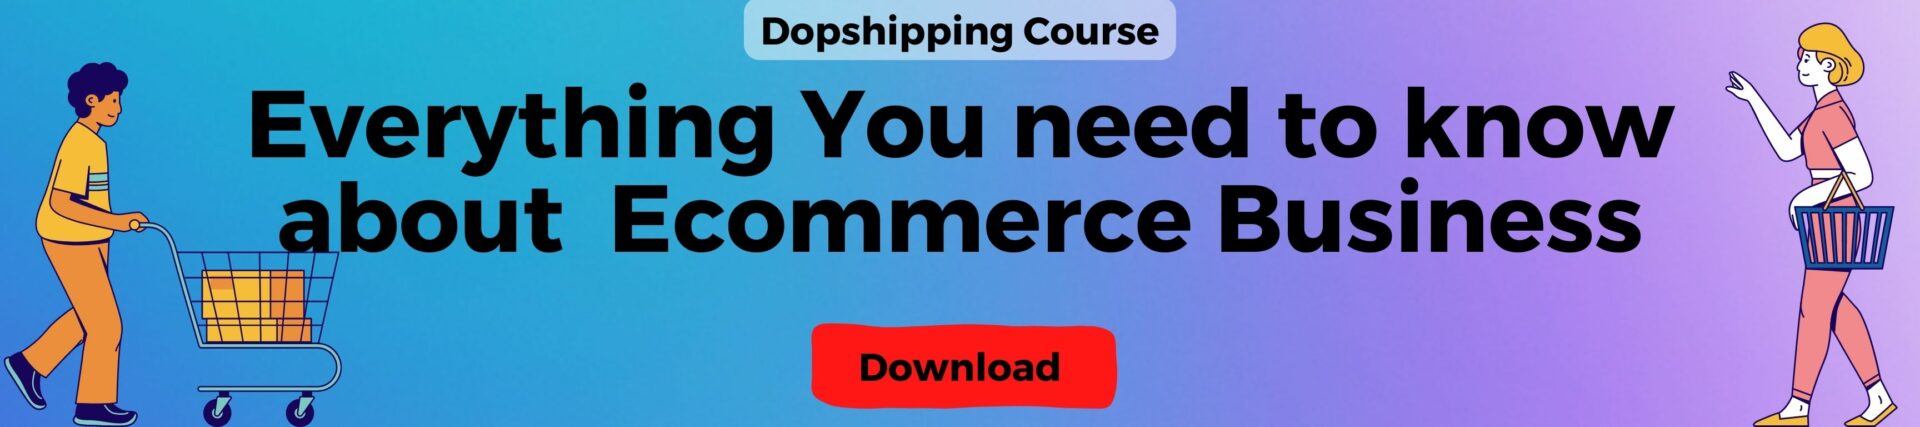 Everything You need to know about Ecommerce Business